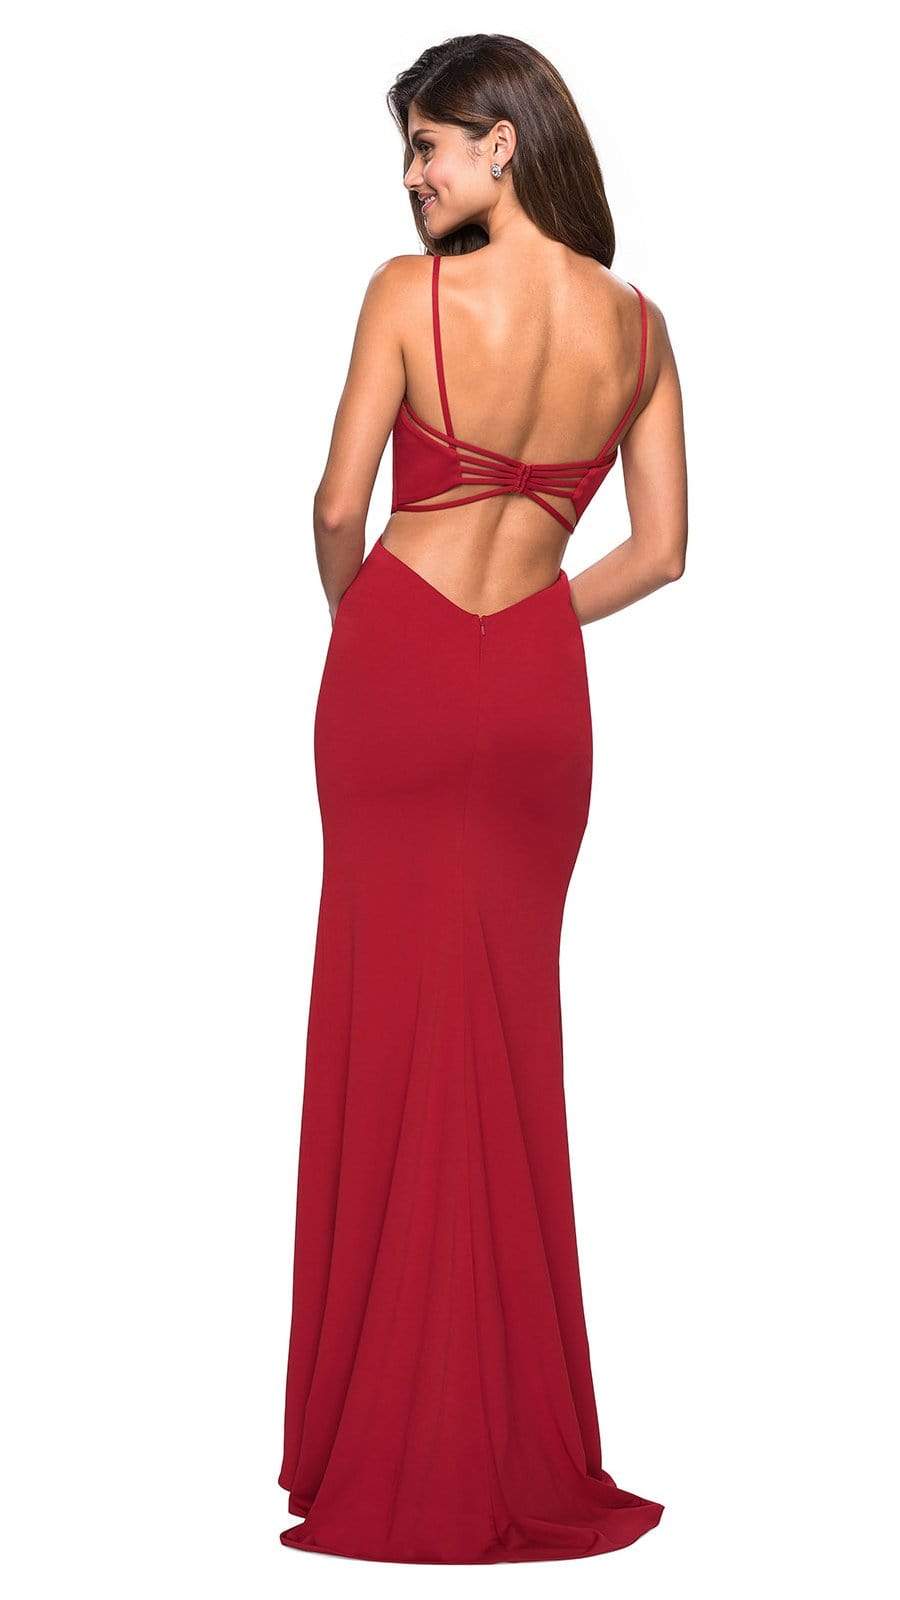 La Femme - V-Neck Strappy Open Back Evening Dress 27516SC -  1 pc Royal Blue in Size 00 and 1 pc Plum in Size 10 Available CCSALE